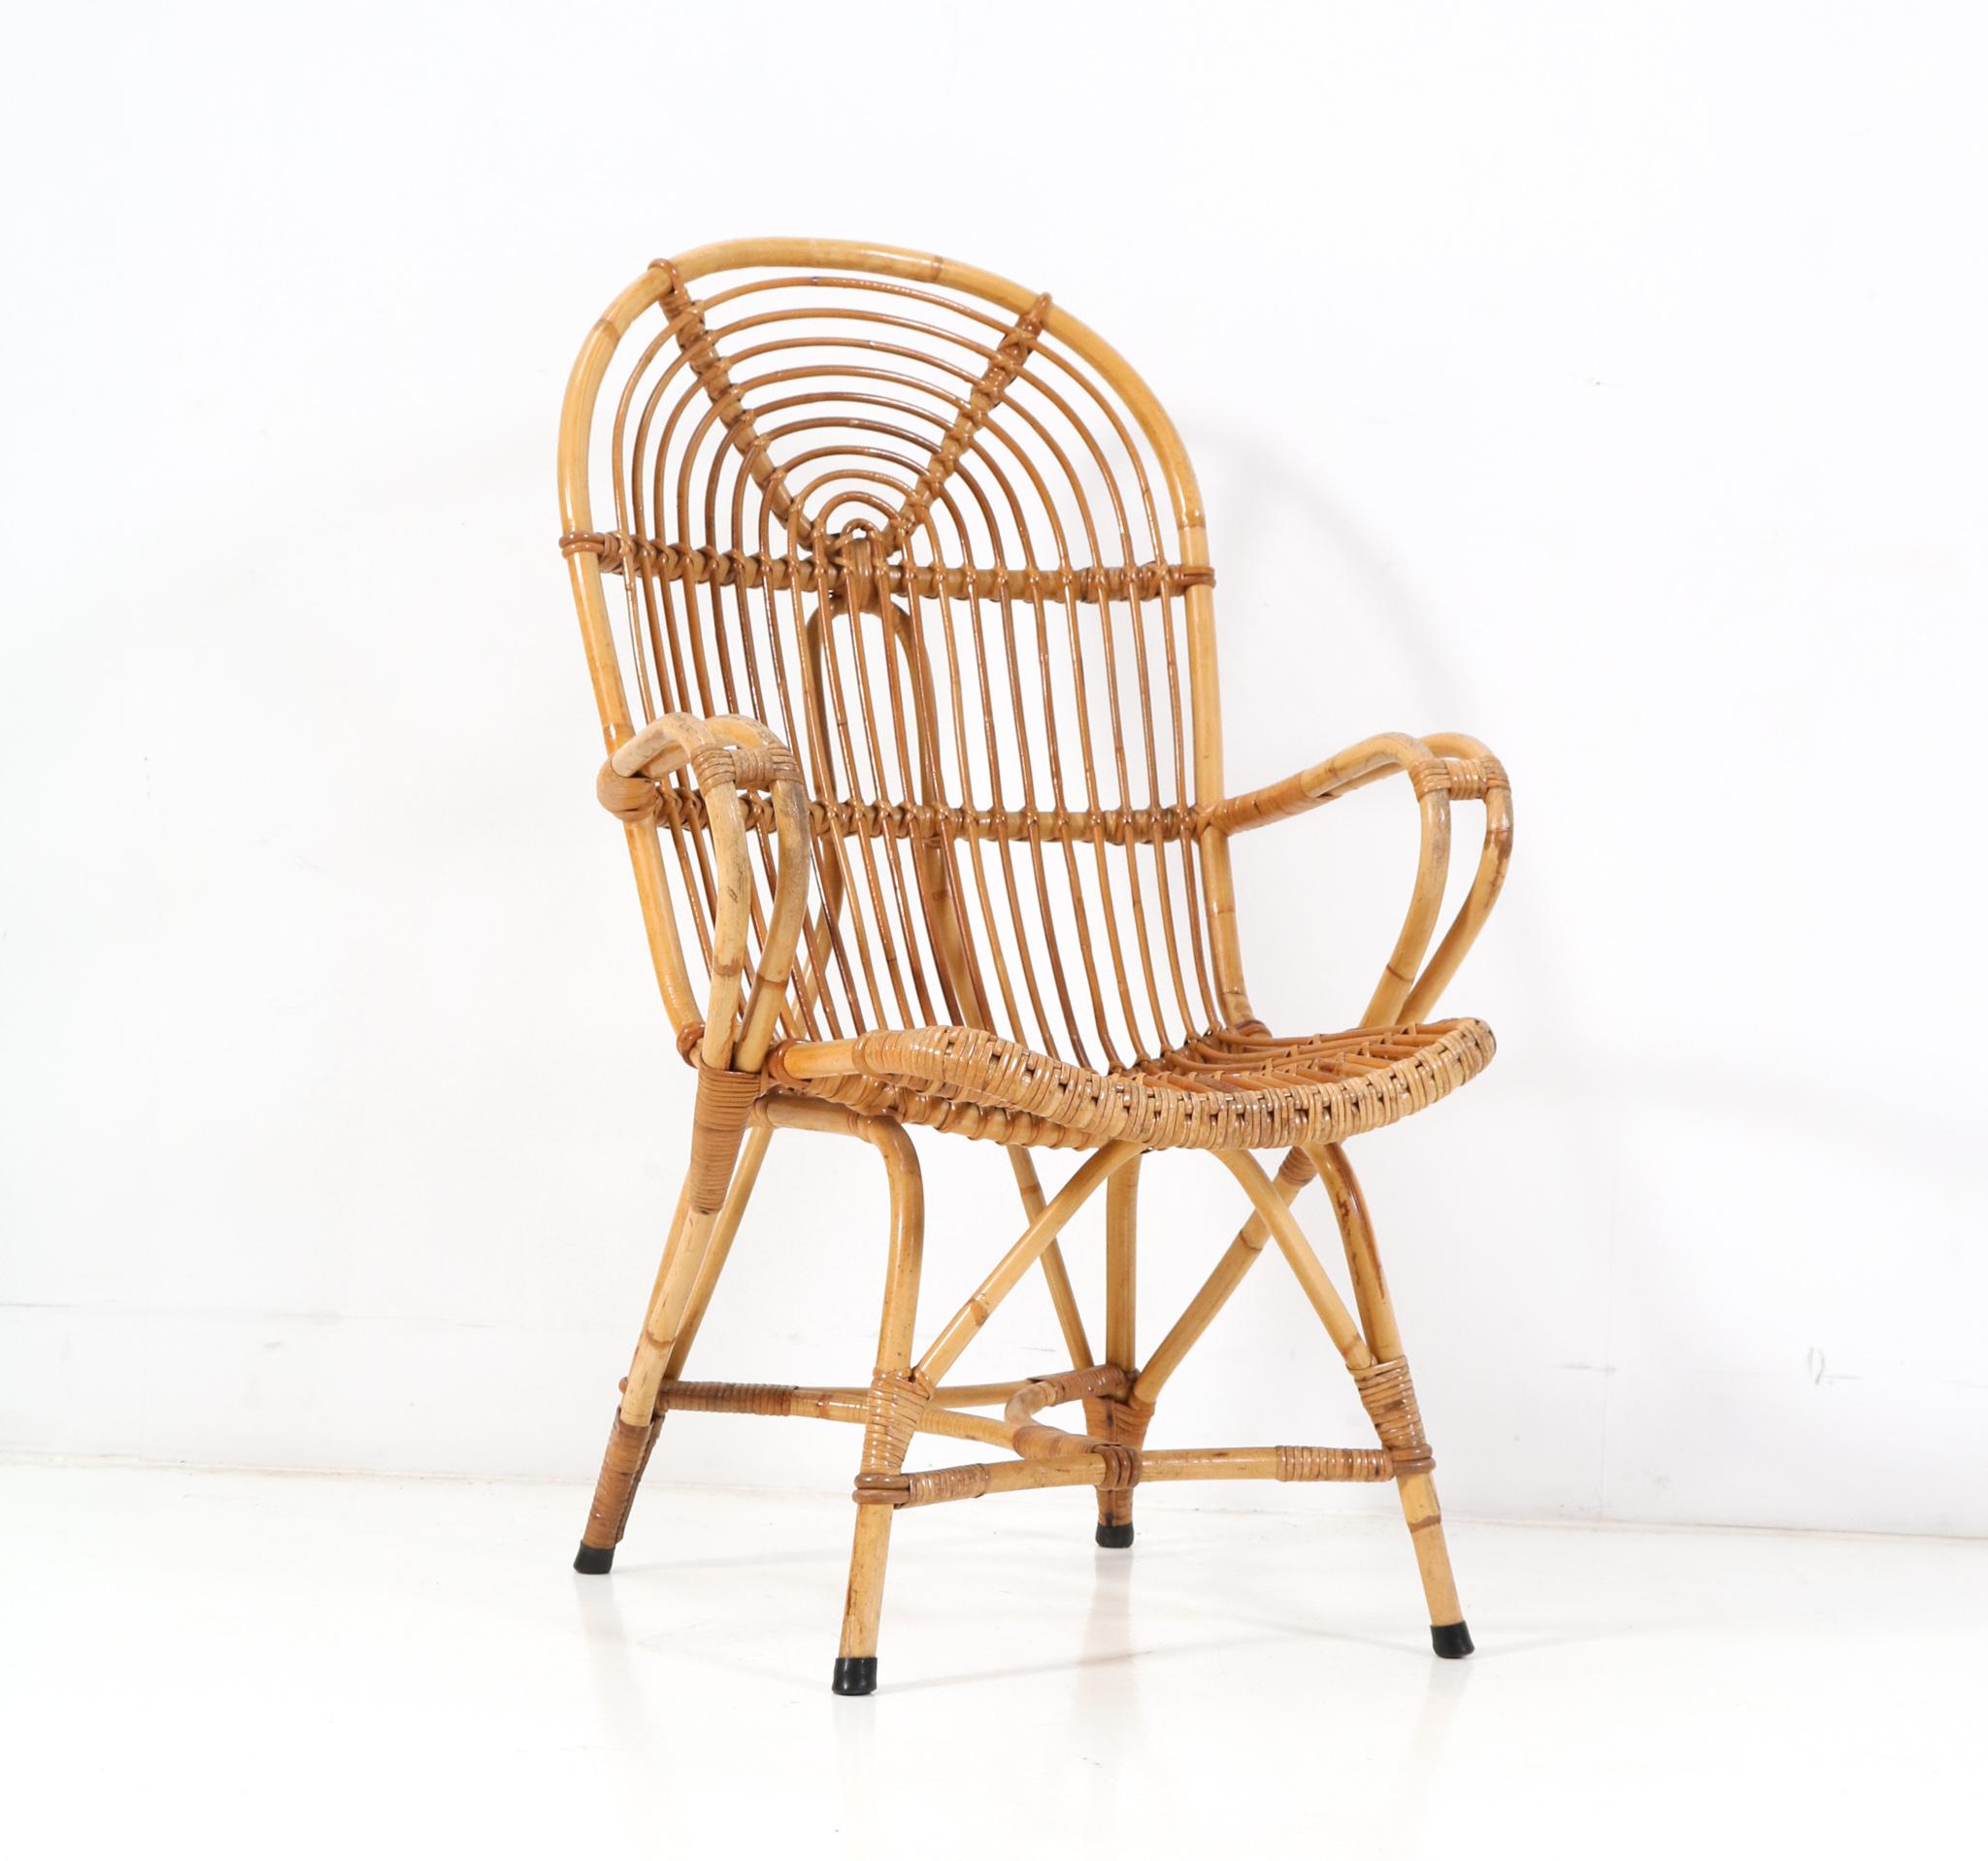 Mid-20th Century Mid-Century Modern Rattan Lounge Chair, 1960s For Sale